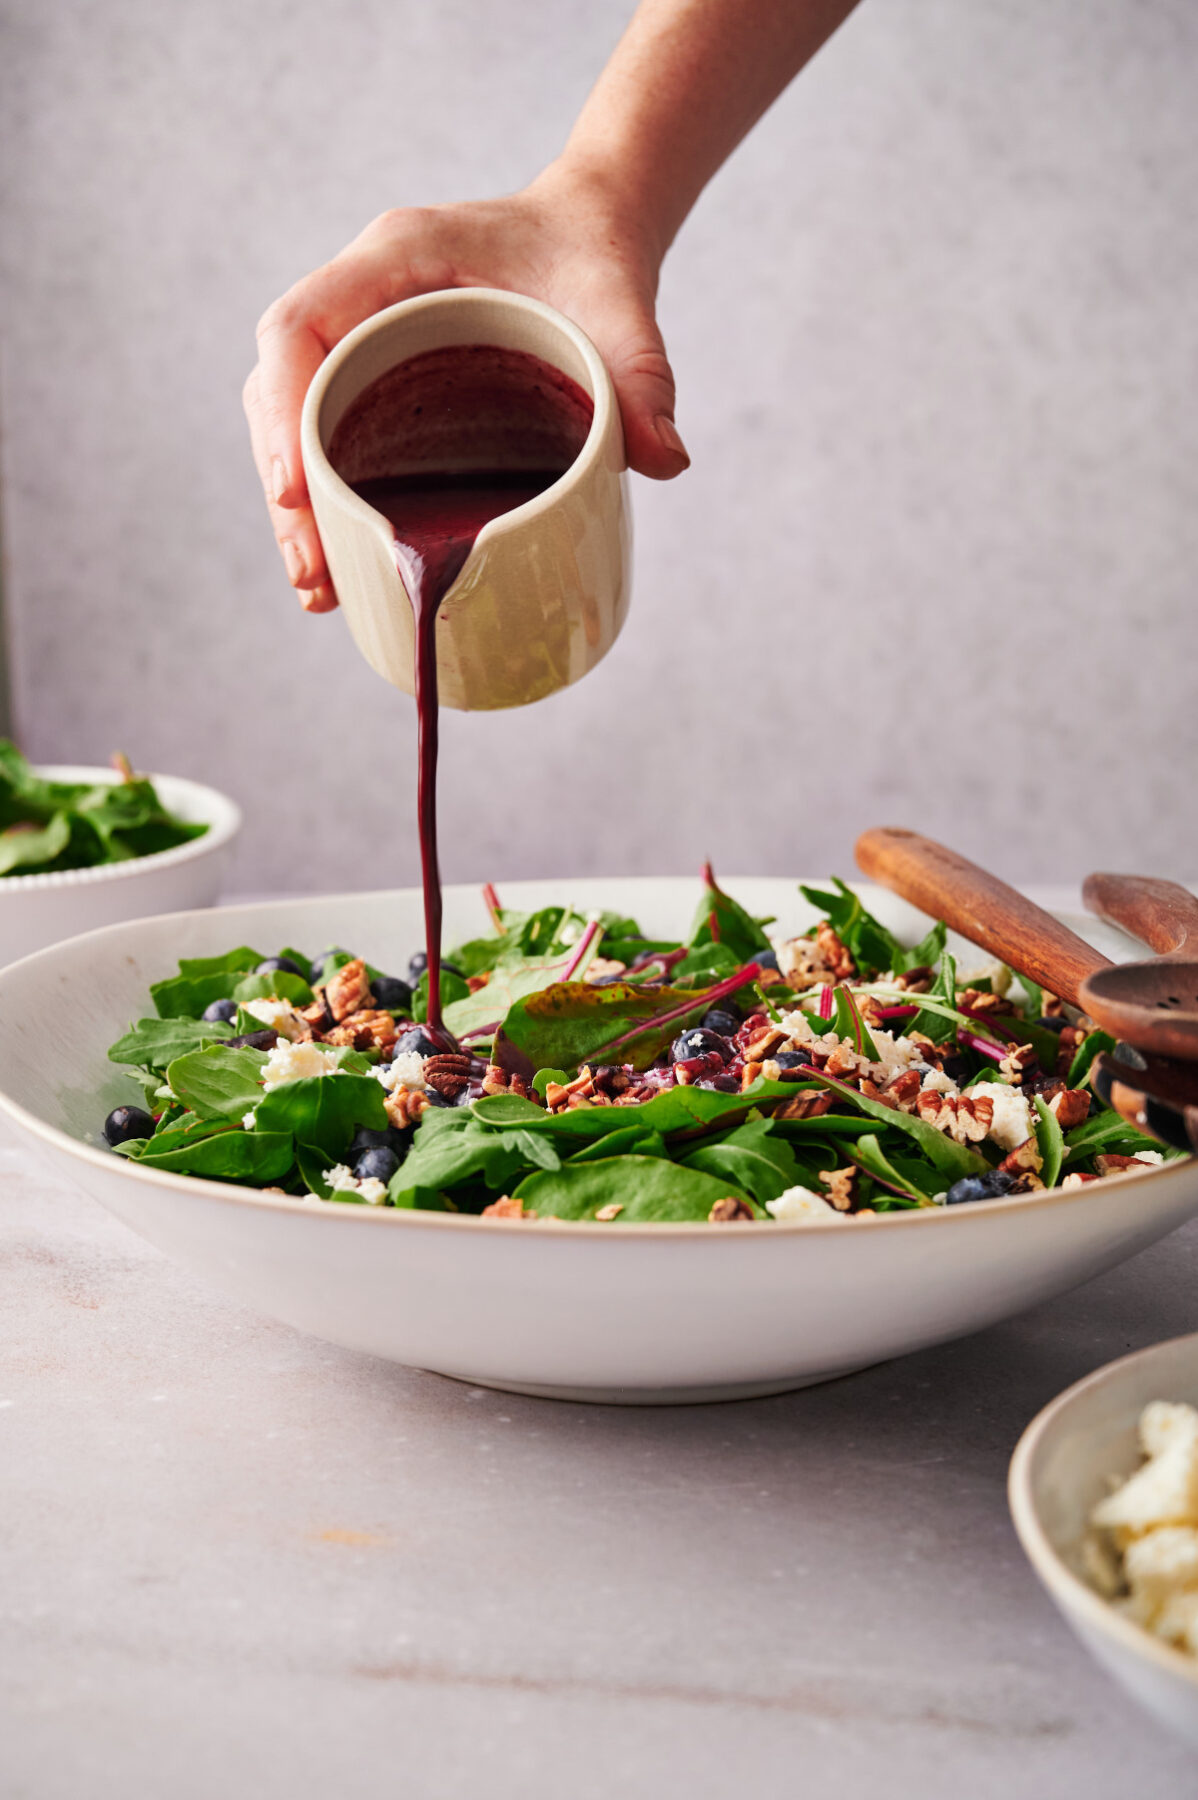 Vertical view of woman's hand pouring blueberry vinaigrette on top of a summer blueberry salad in a white bowl.